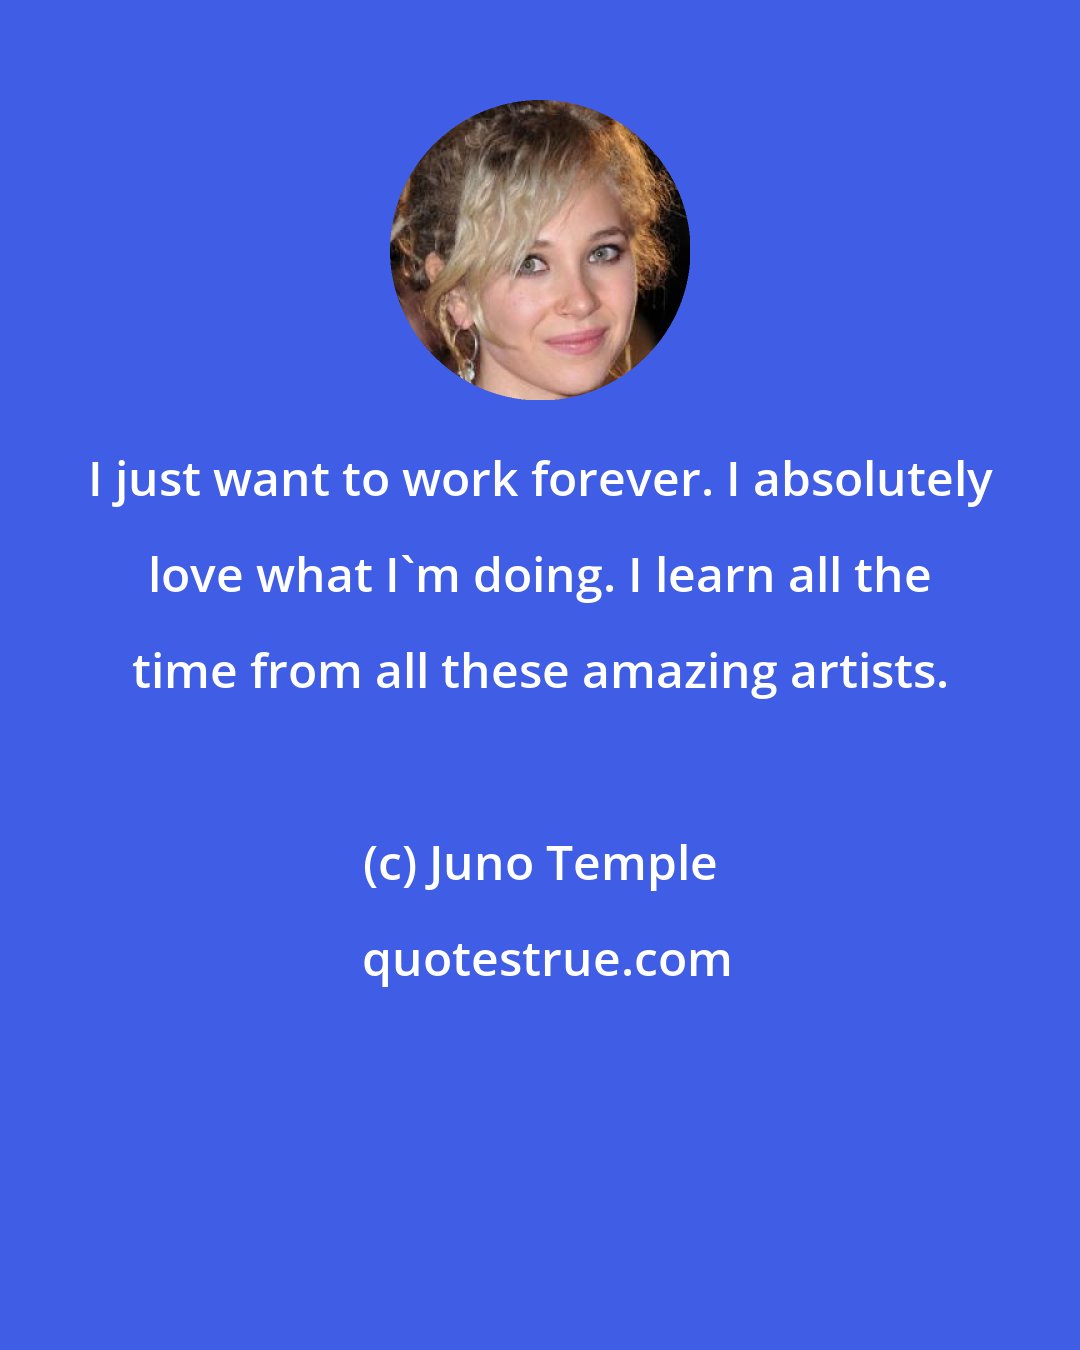 Juno Temple: I just want to work forever. I absolutely love what I'm doing. I learn all the time from all these amazing artists.